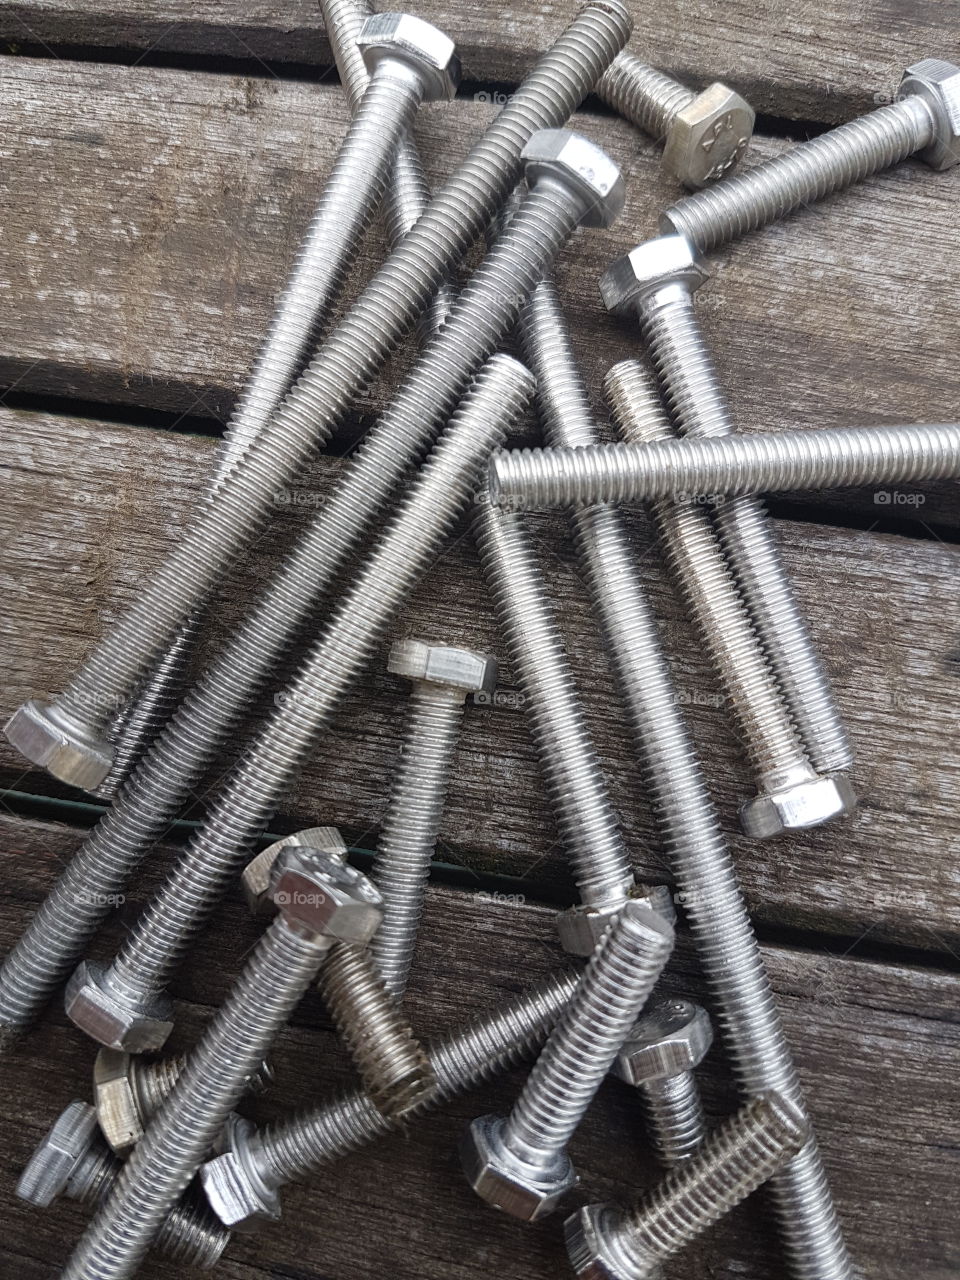 fasteners stainless steel